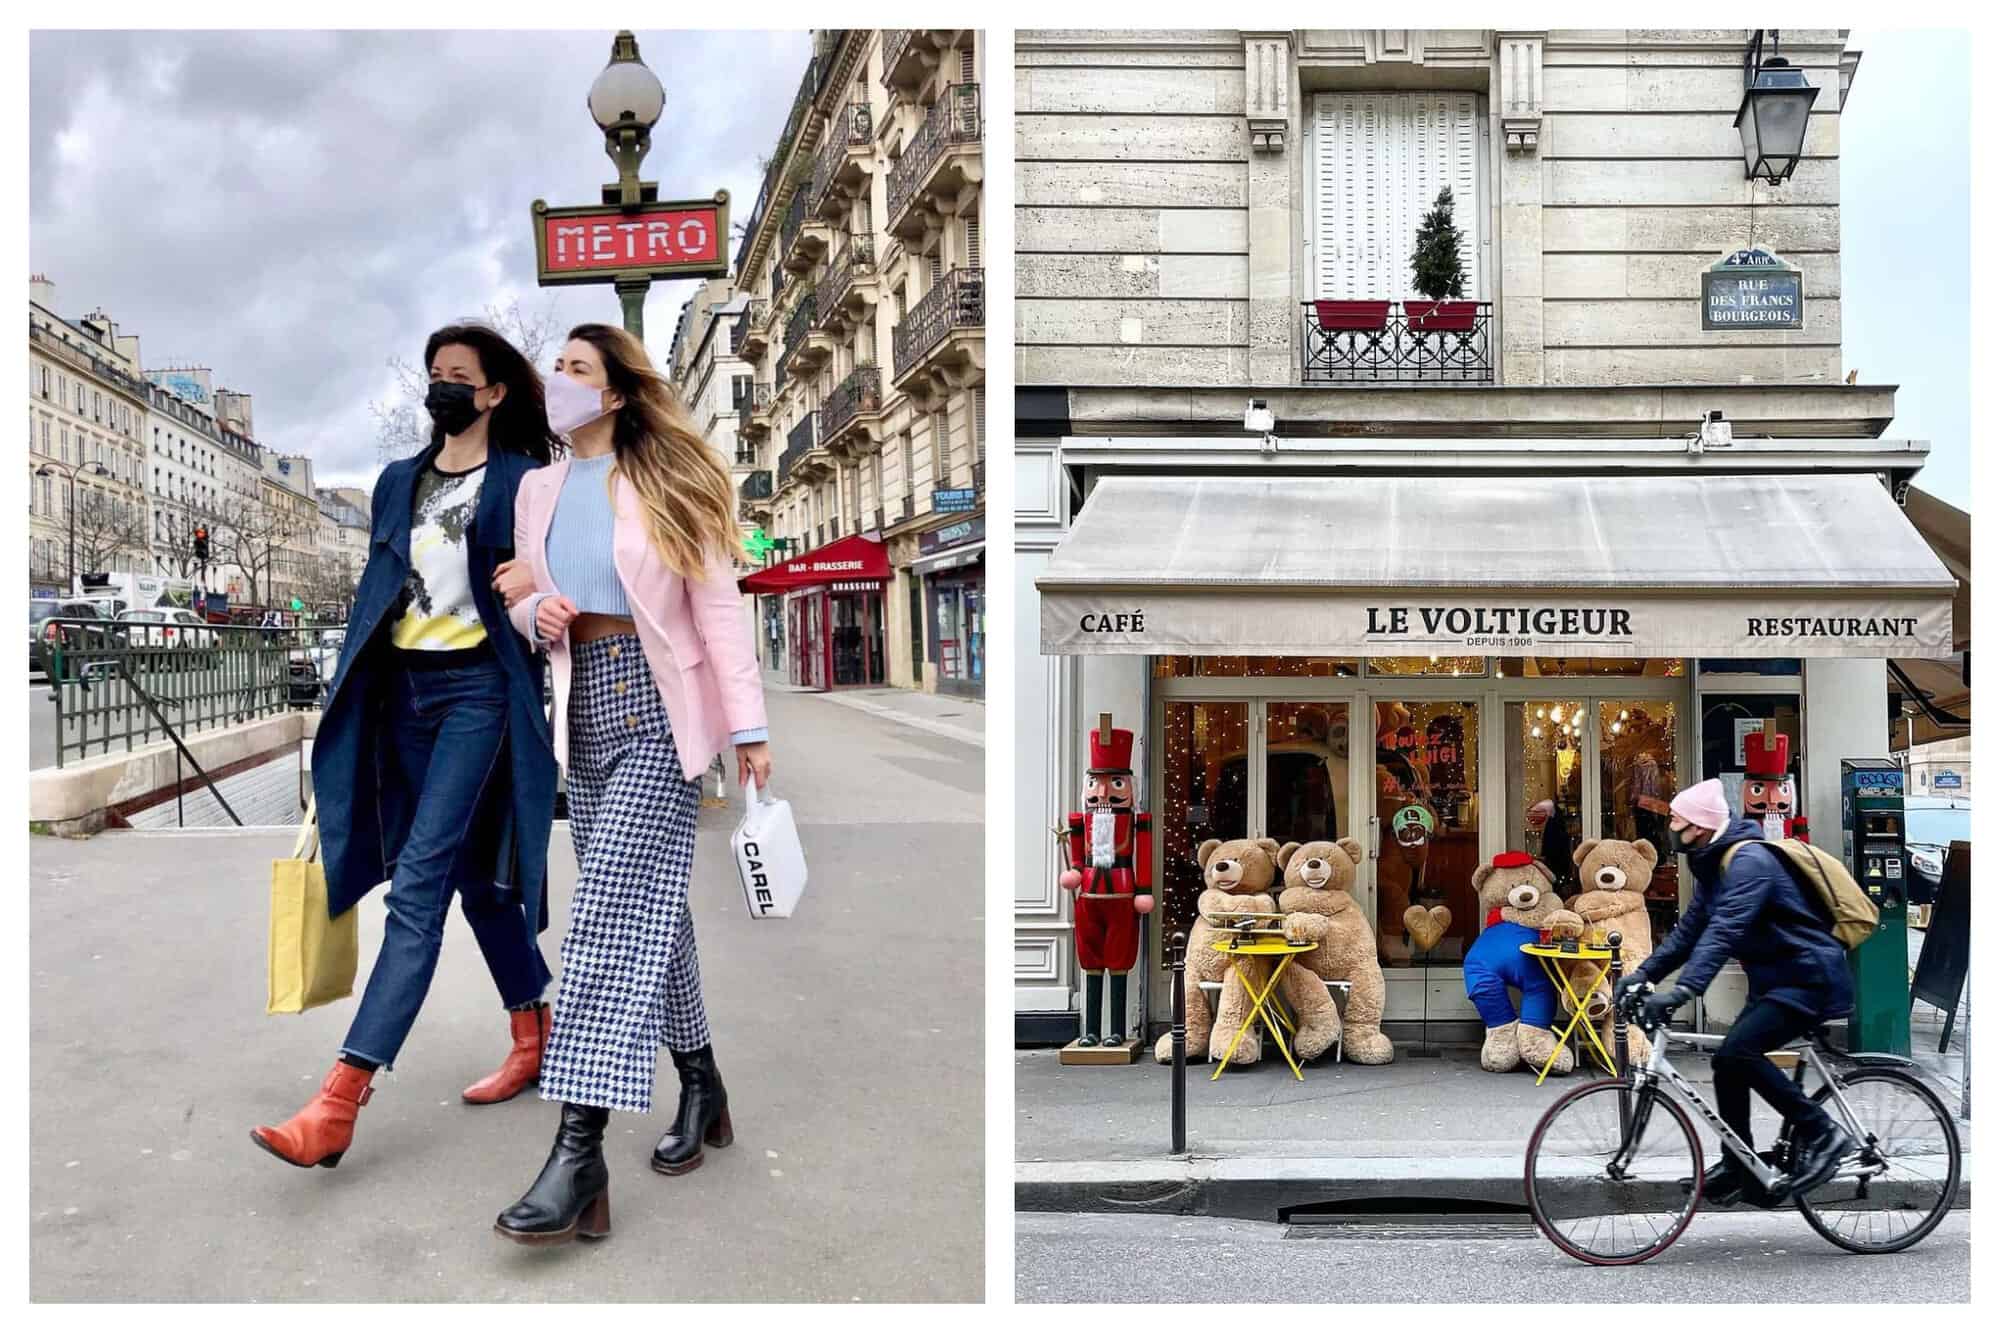 Left: A photo of two ladies living in Le Marais, Kasia Dietz and Anna Dawson, walking side by side near a Métro station in their hip outfits. Right: A photo of a famous bar in Le Marais named Le Voltigeur with its iconic giant teddy bears sitting in their outdoor tables while a cyclist is passing by. Their famed life-sized nutcracker dolls can also be seen here.